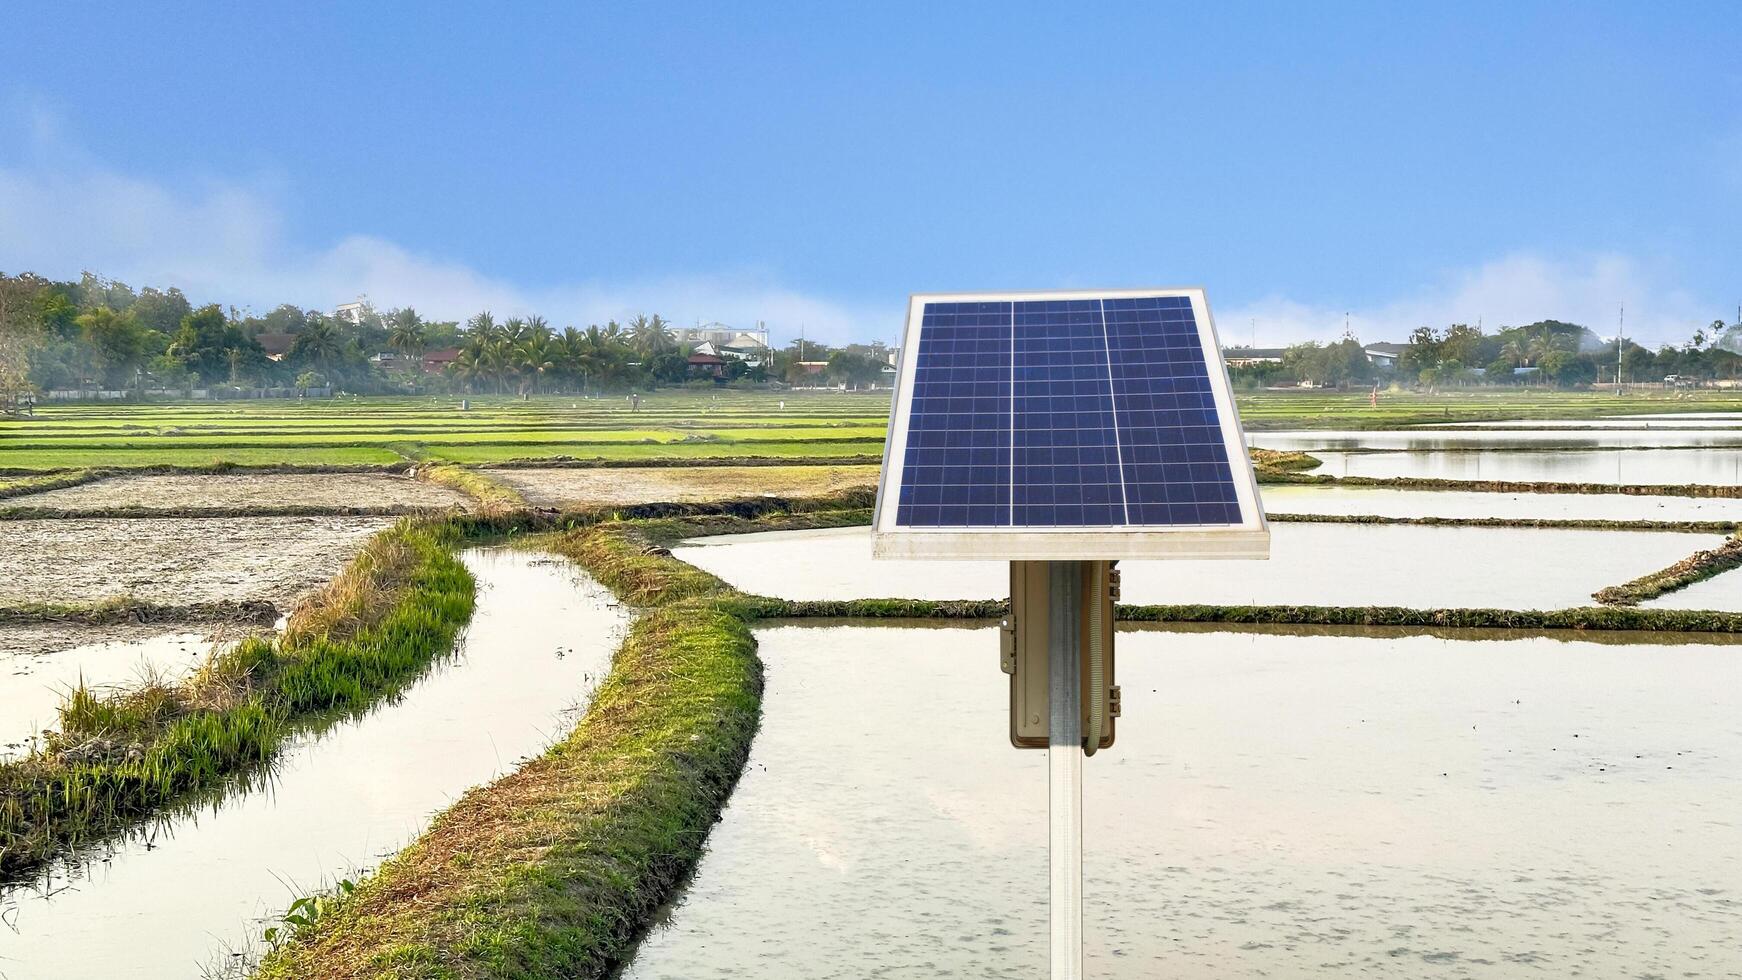 Paddy field irrigated with solar energy in rural area photo